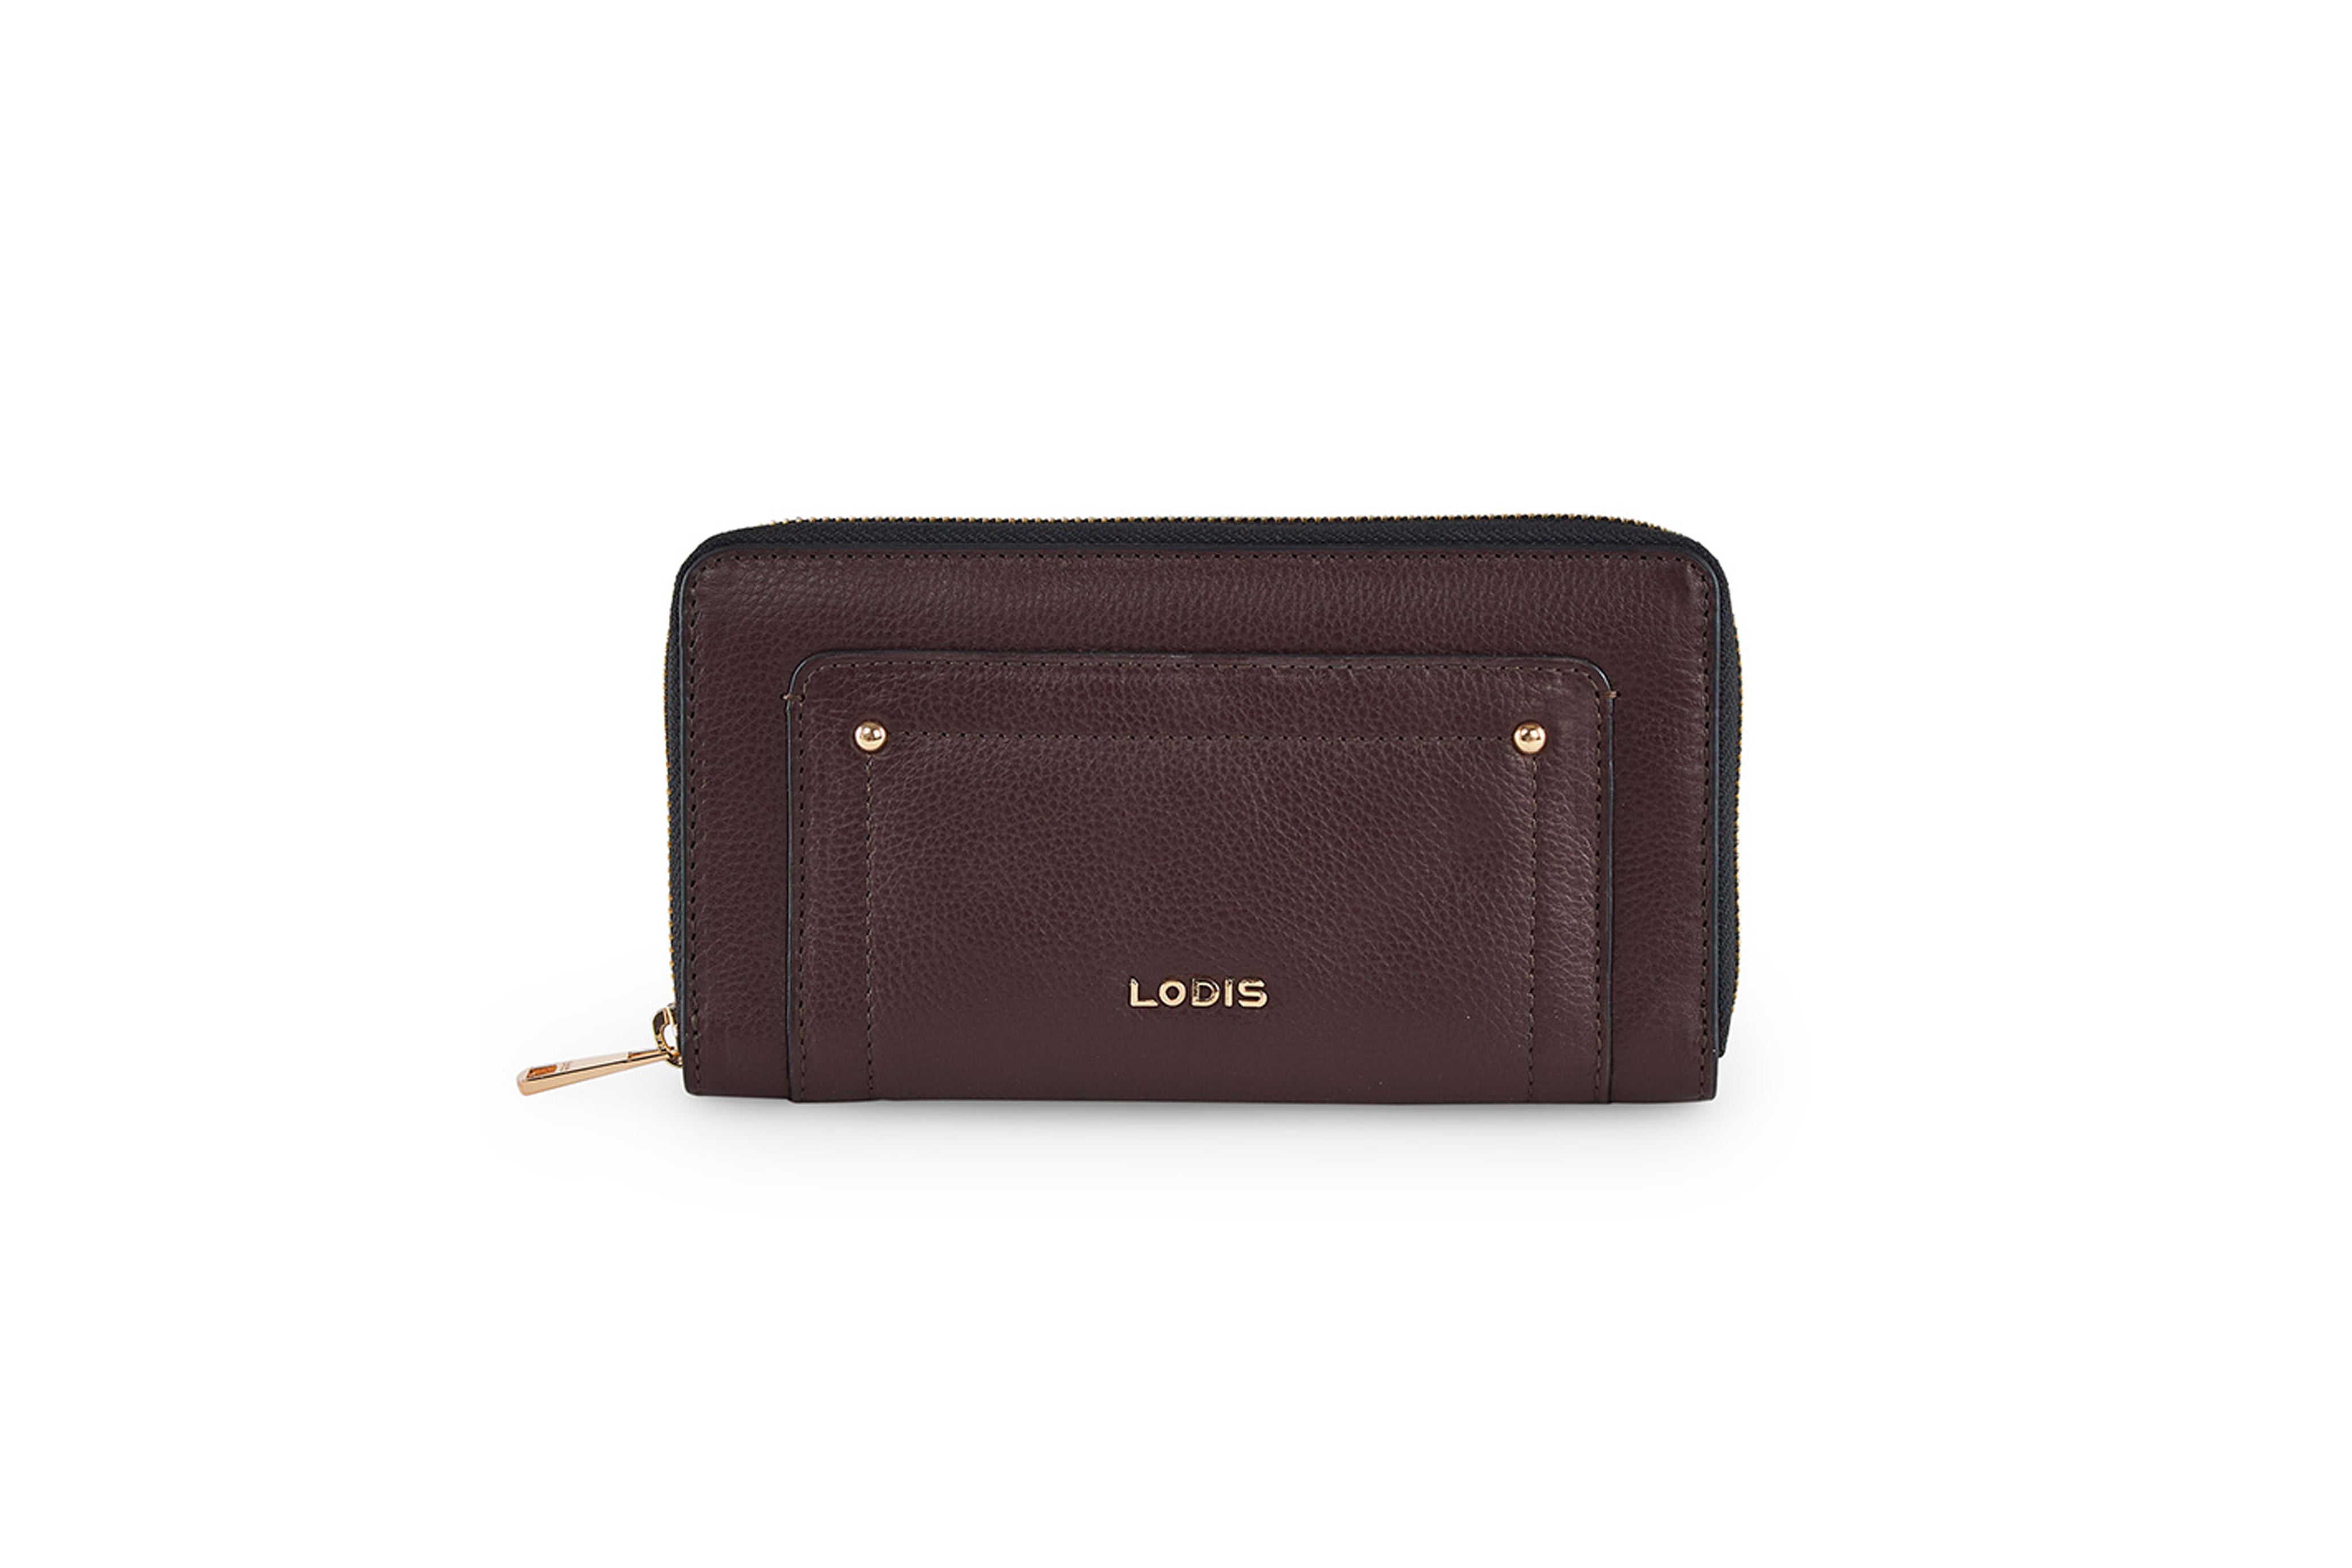 443436 MARMONT CONTINENTAL WALLET Designer Womens Long Flap Leather Wallets  Card Holder Zip Coin Slim Purse Key Pouch Mini Pochette Accessoires Cles  Cardholder From Jerseyland020, $35.54